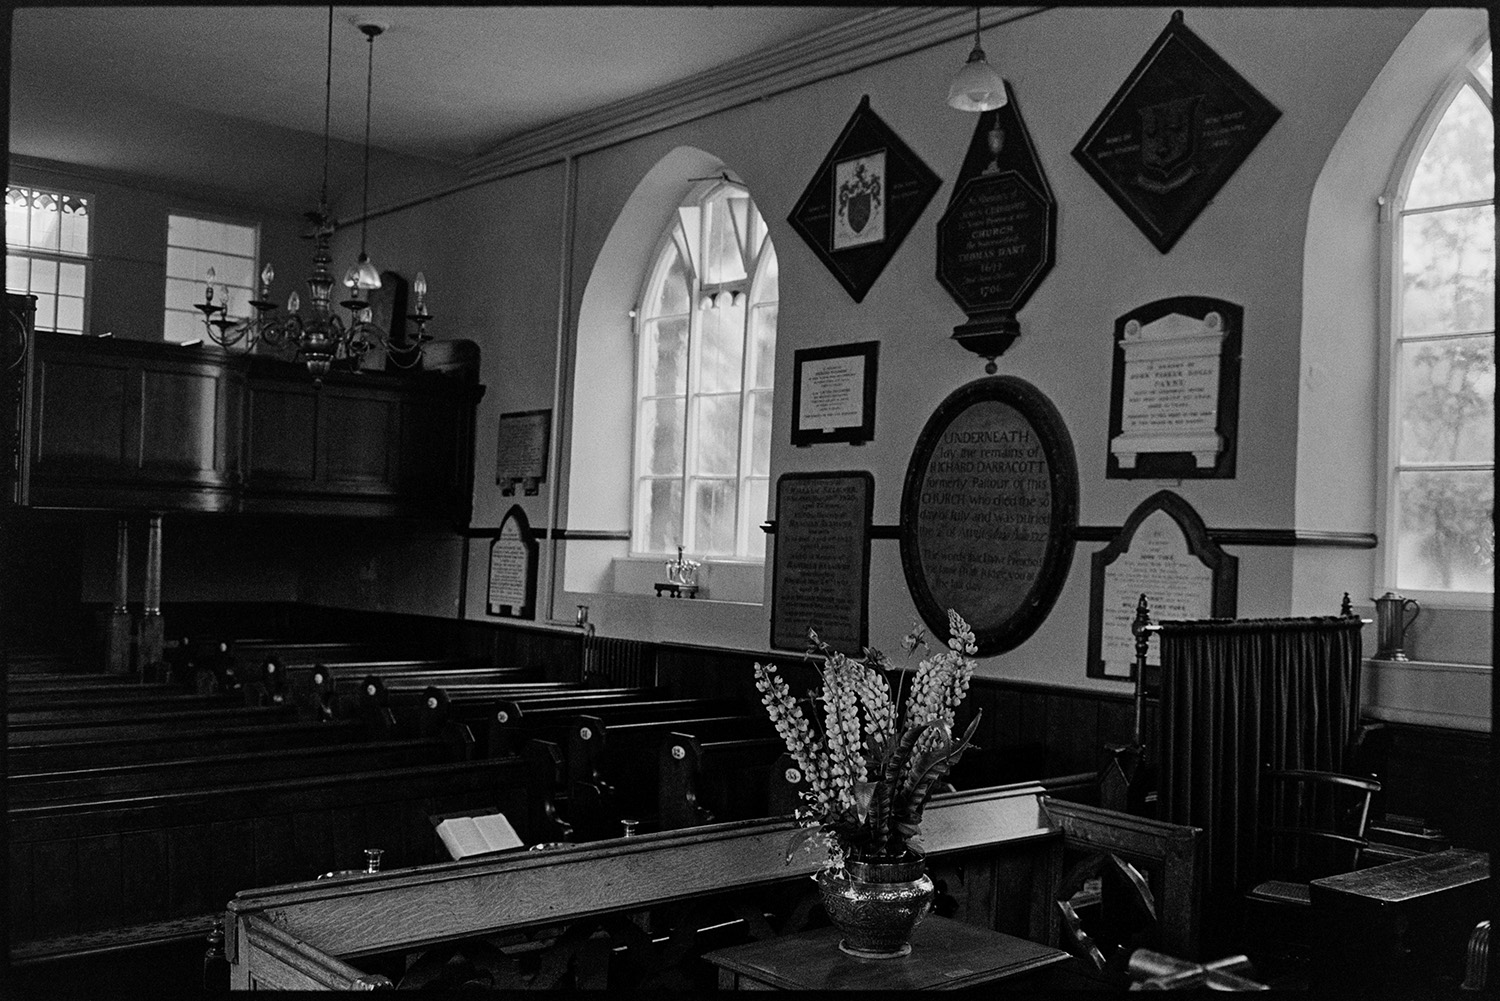 Interior and exterior of old Congregational chapel, wall plaques, stairs and railings. 
[The interior of the Congregational Chapel in East Street, Chulmleigh. Pews, a balcony, a flower arrangement and wall plaques are visible.]